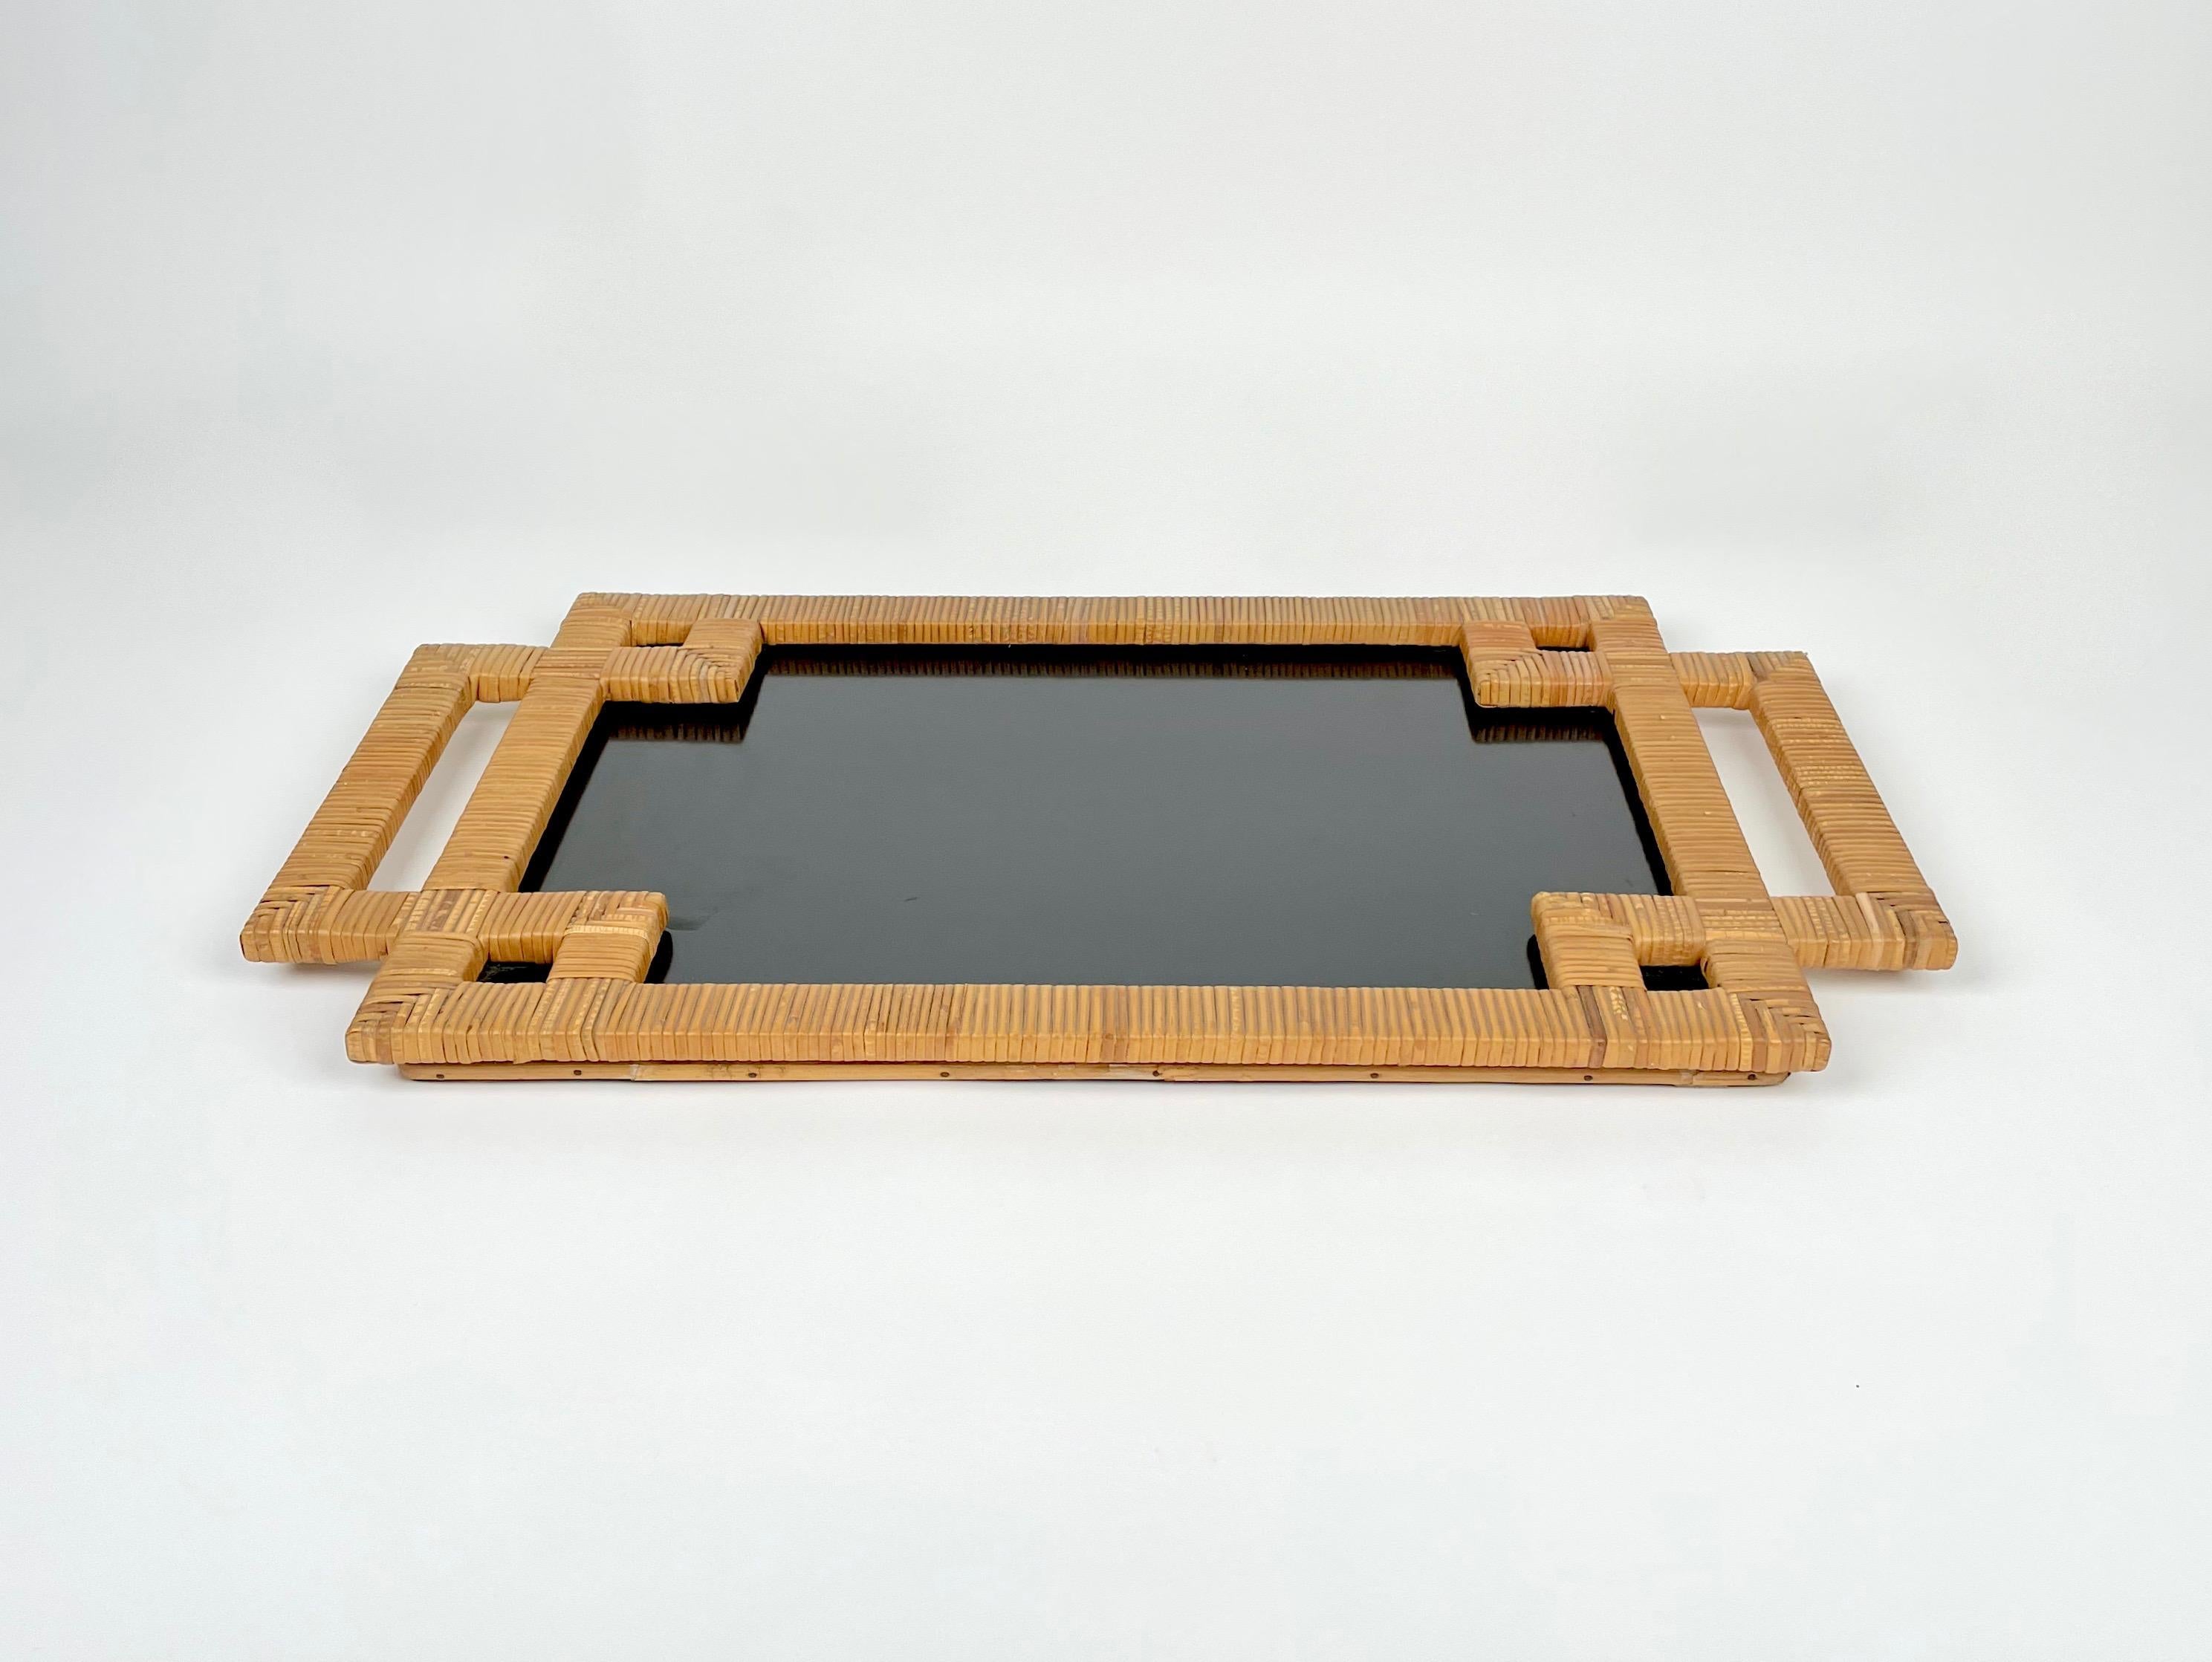 Rectangular serving tray in black laminate framed by rattan with handles. Made in Italy in the 1970s.